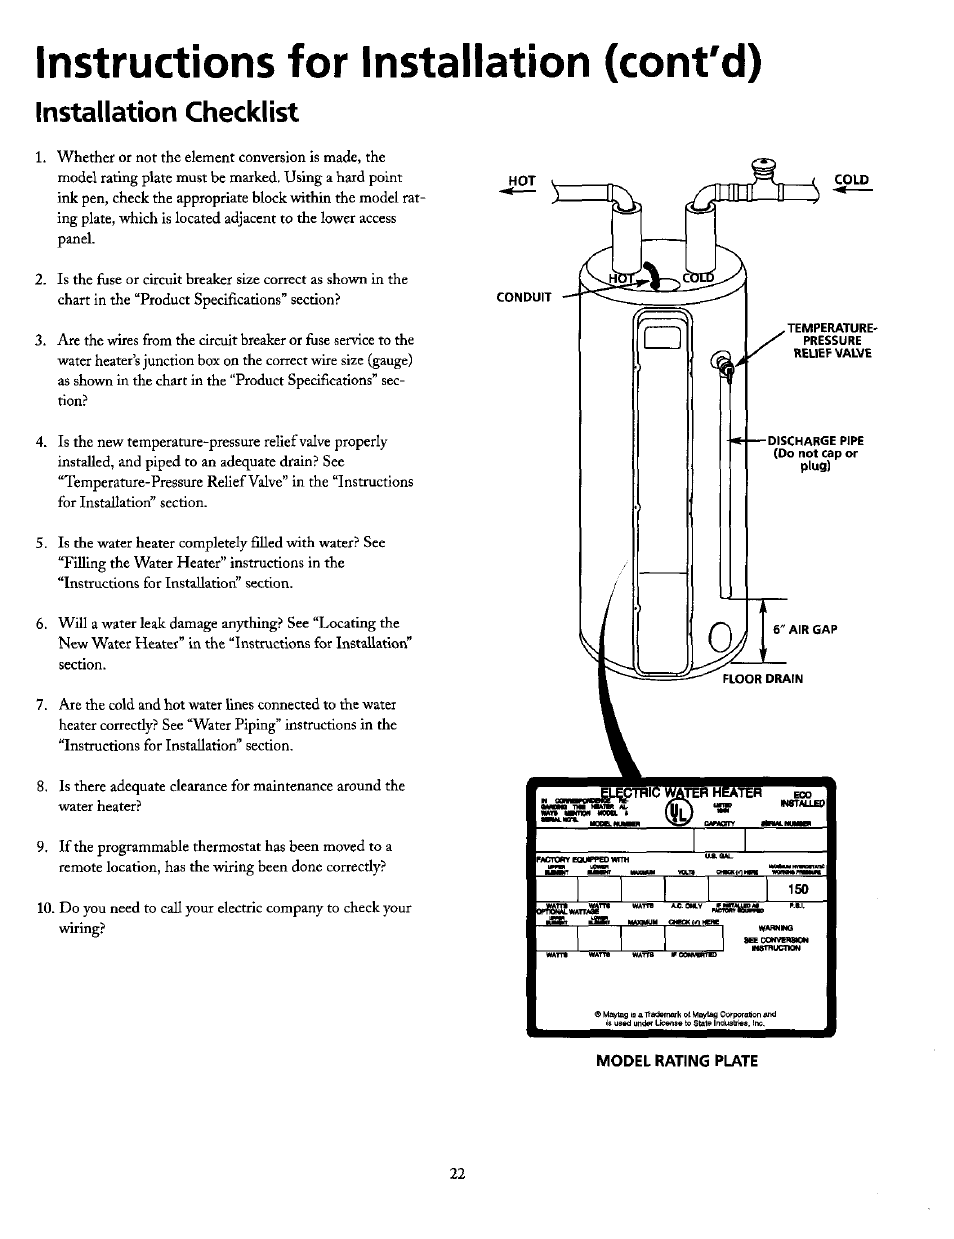 Instructions for installation (cont'd), Installation checklist, Model rating plate | Electric tofter heatlr | Maytag HE21250PC User Manual | Page 22 / 40